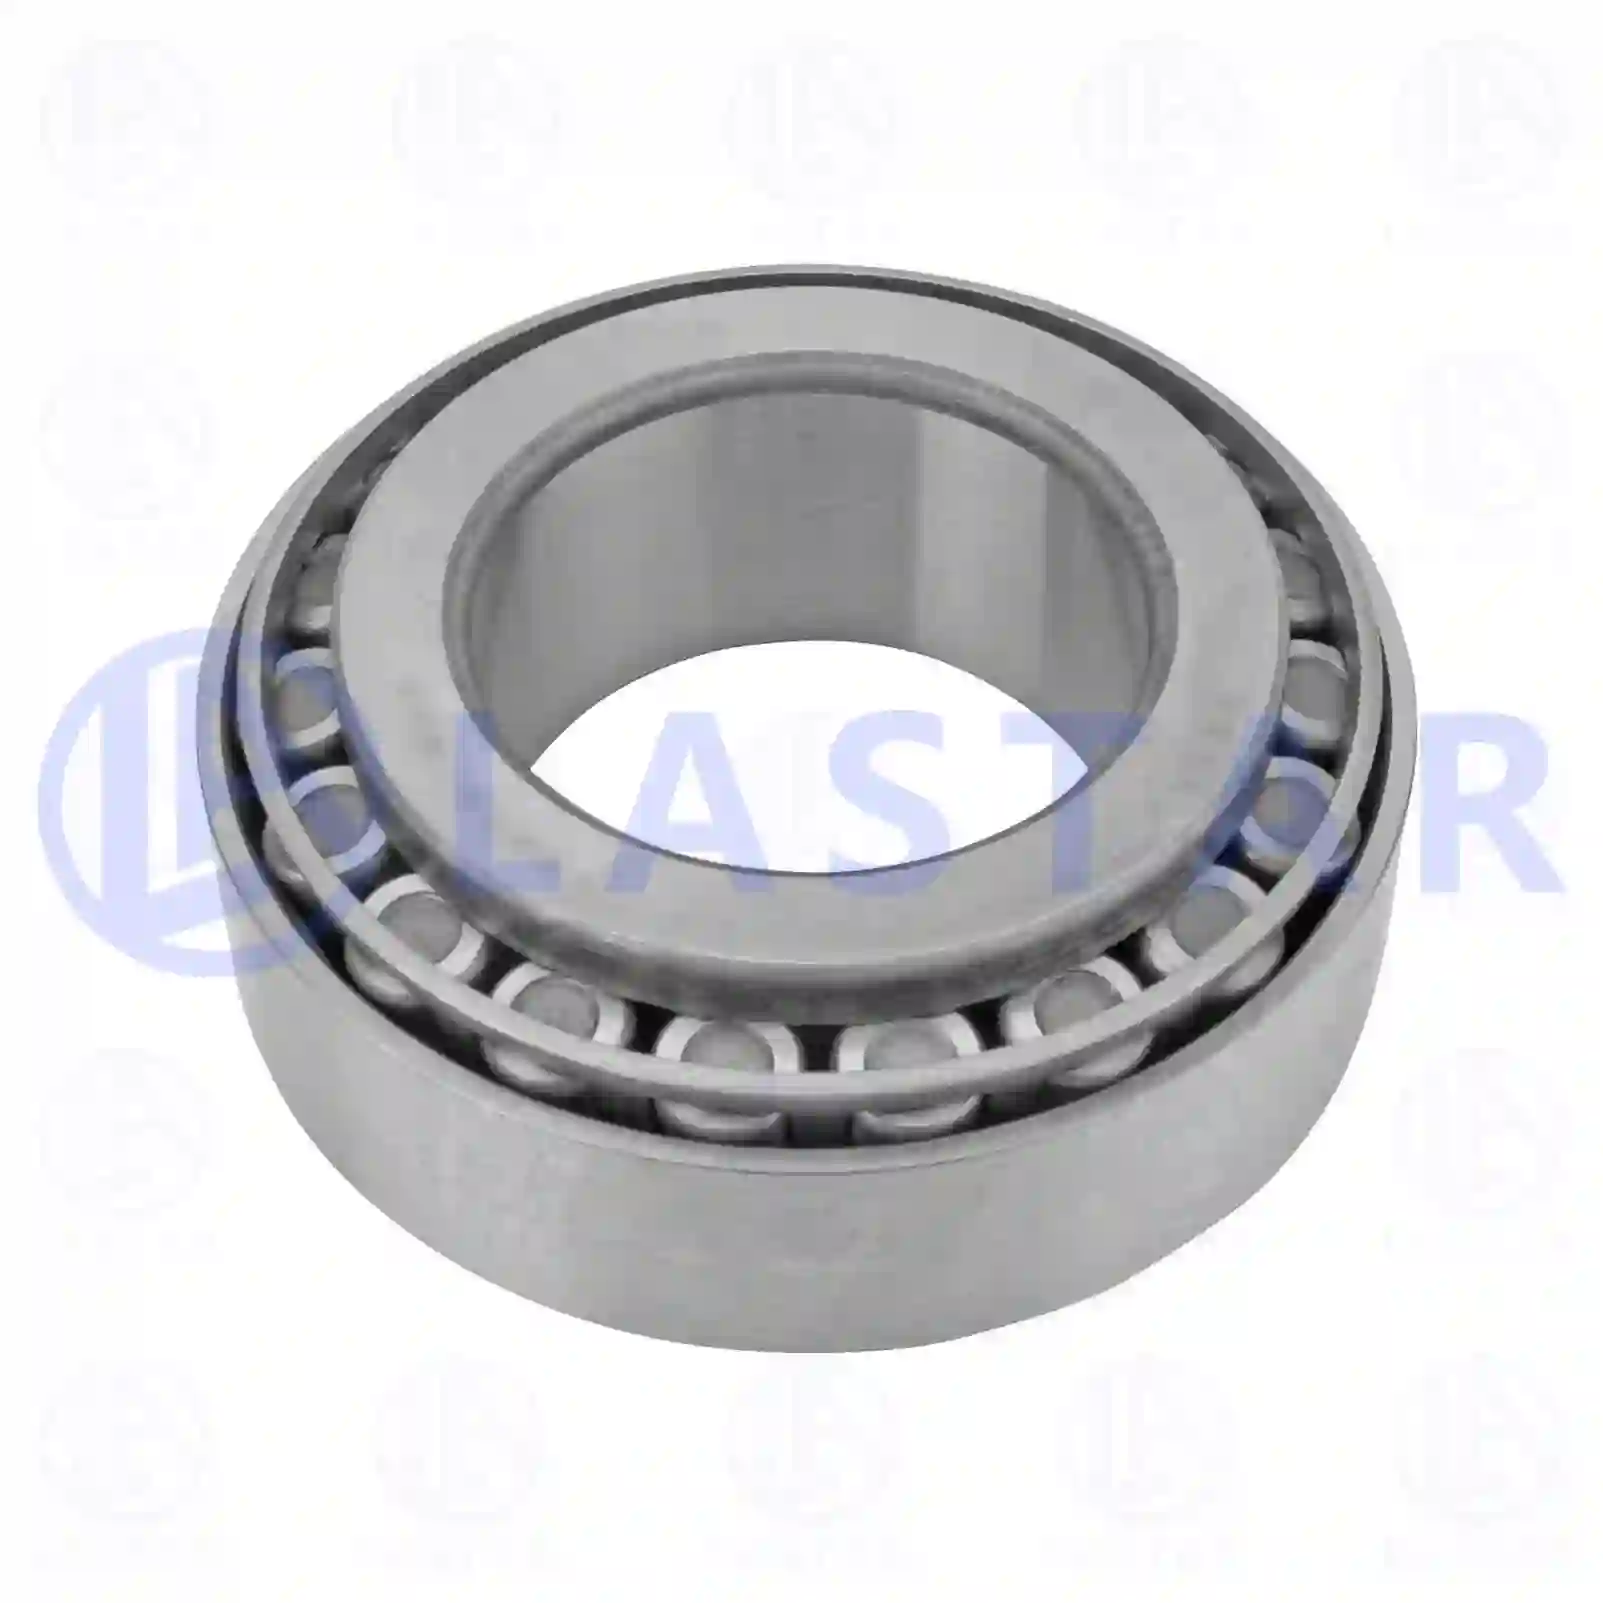 Tapered roller bearing, 77732373, 07160361, 7160361, 06324890005, 06324890045, 06324890101, 06324890109, 81324890005, N1011014903, 0059812805, 0059814205, 0023336081, 7401652563, 4200006400, 345835, 1652563 ||  77732373 Lastar Spare Part | Truck Spare Parts, Auotomotive Spare Parts Tapered roller bearing, 77732373, 07160361, 7160361, 06324890005, 06324890045, 06324890101, 06324890109, 81324890005, N1011014903, 0059812805, 0059814205, 0023336081, 7401652563, 4200006400, 345835, 1652563 ||  77732373 Lastar Spare Part | Truck Spare Parts, Auotomotive Spare Parts